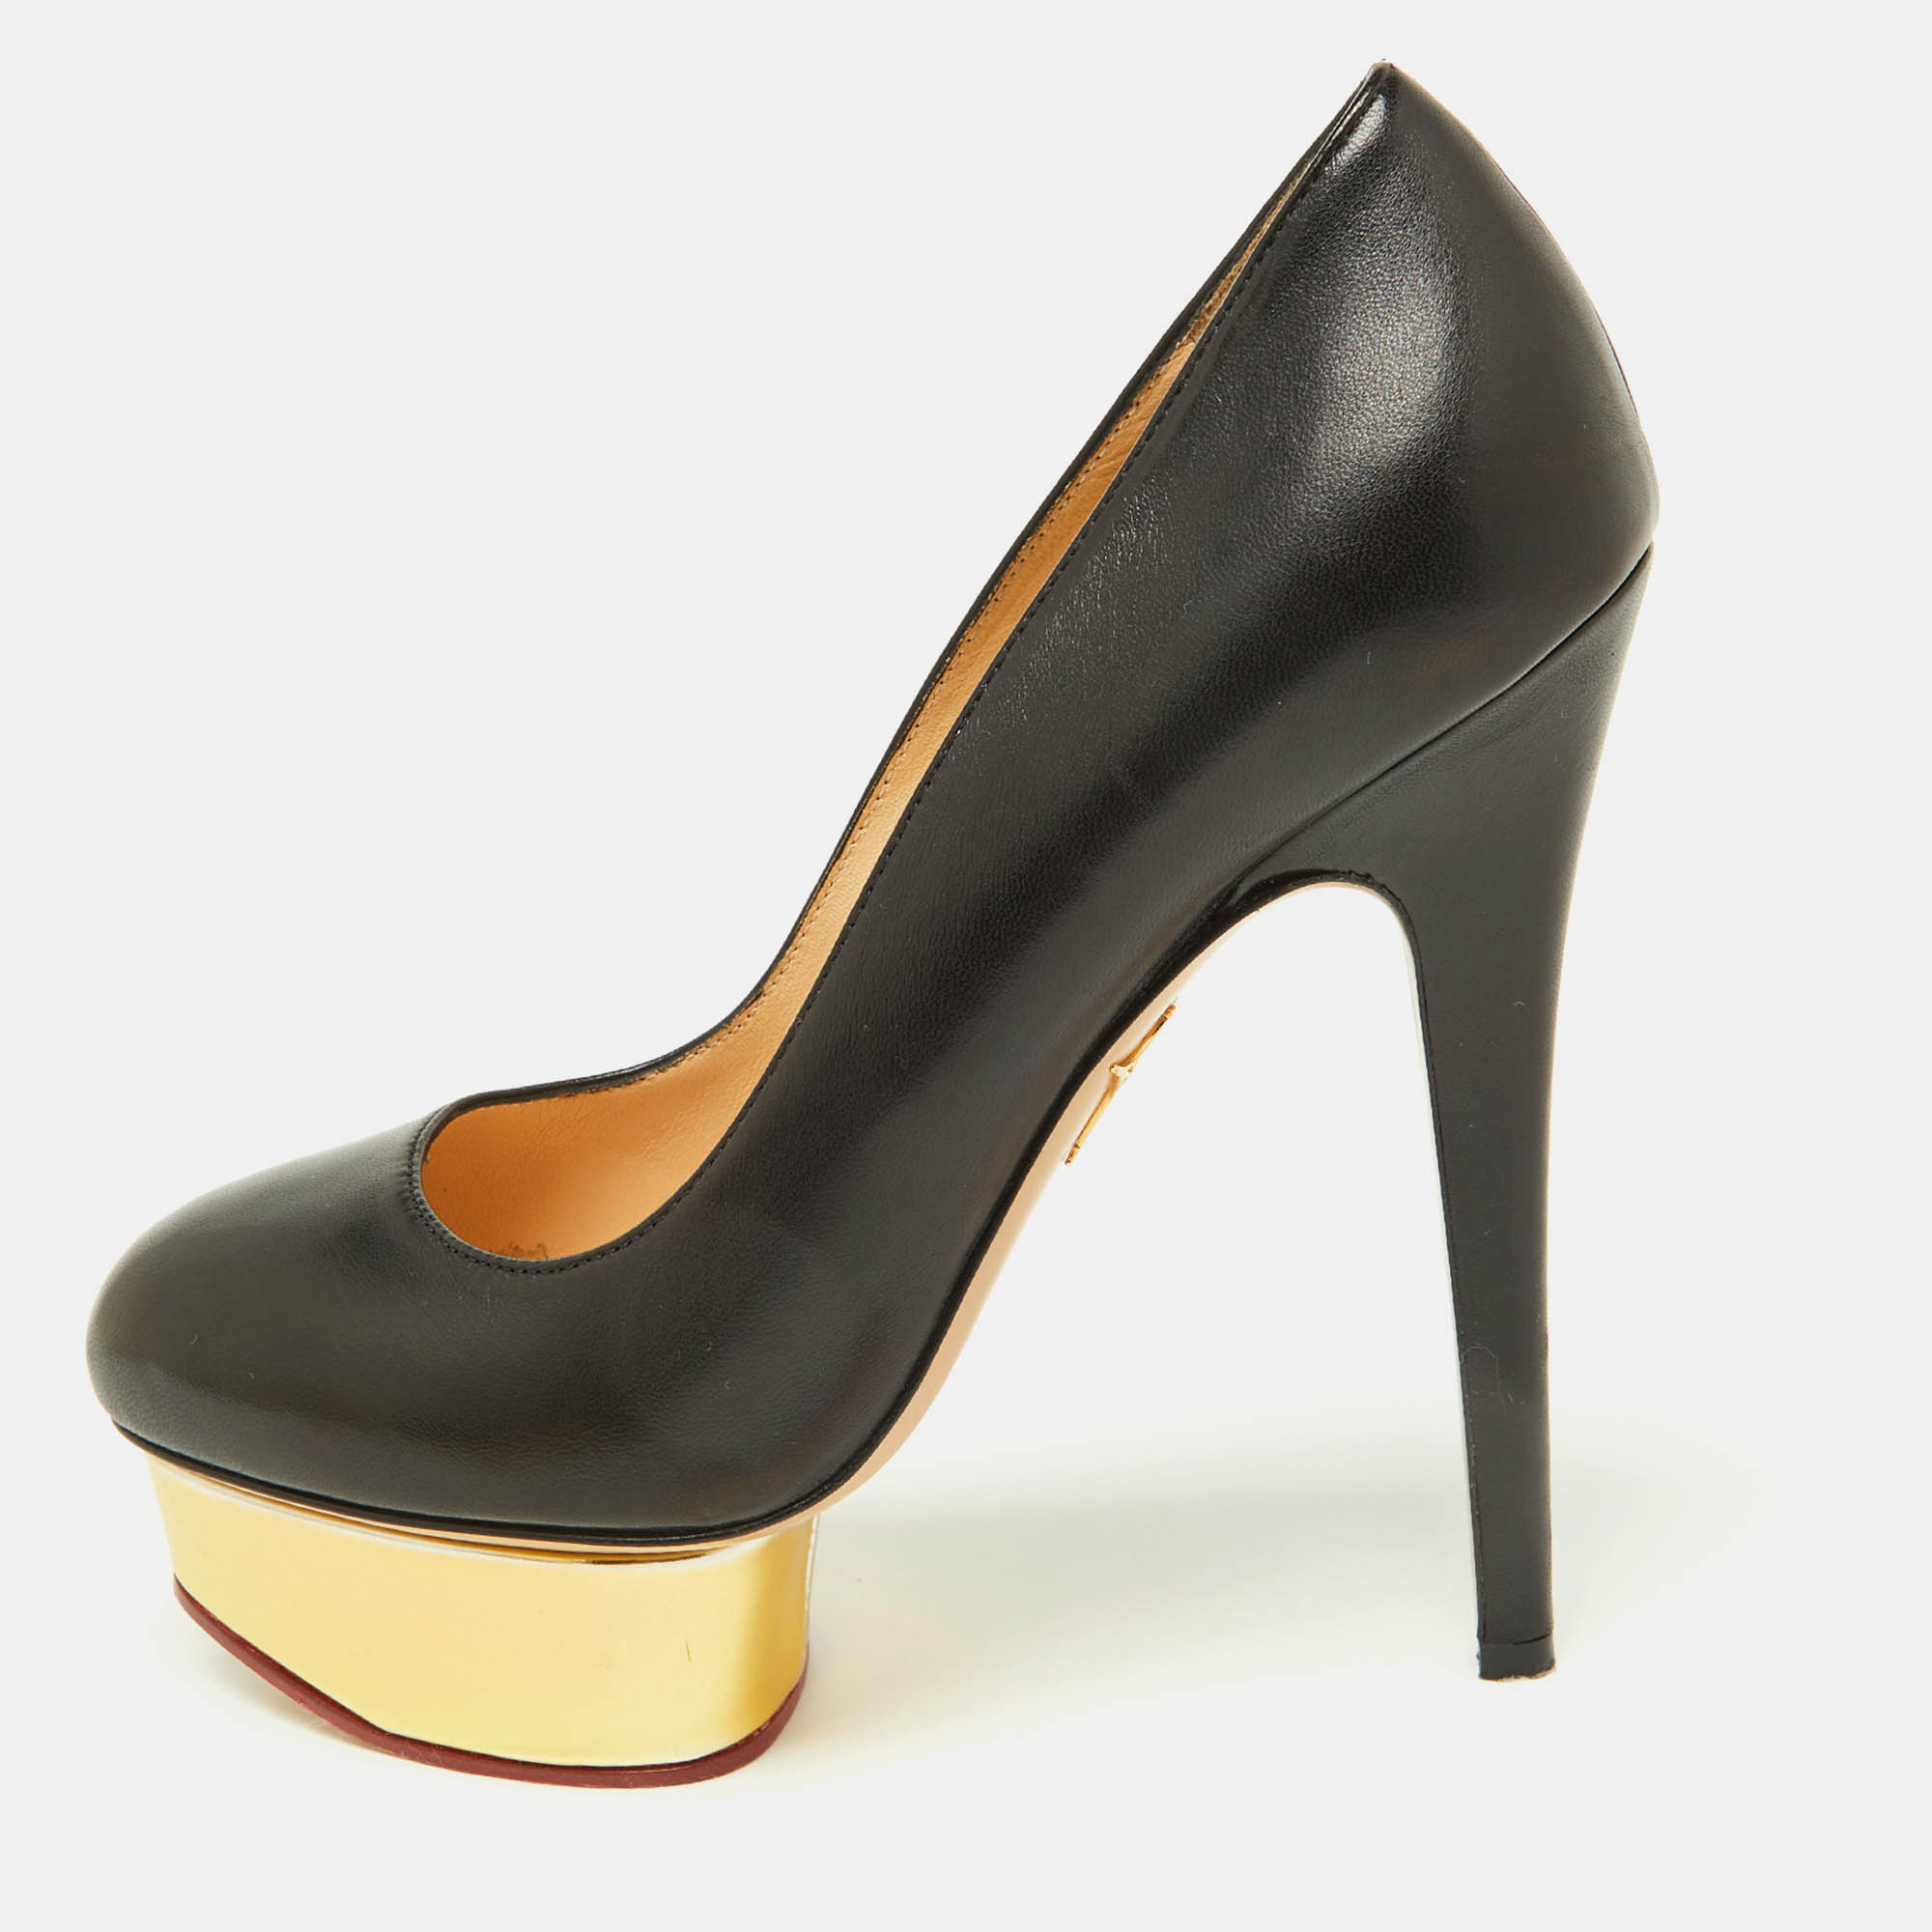 Pre-owned Charlotte Olympia Black Leather Dolly Platform Pumps Size 37